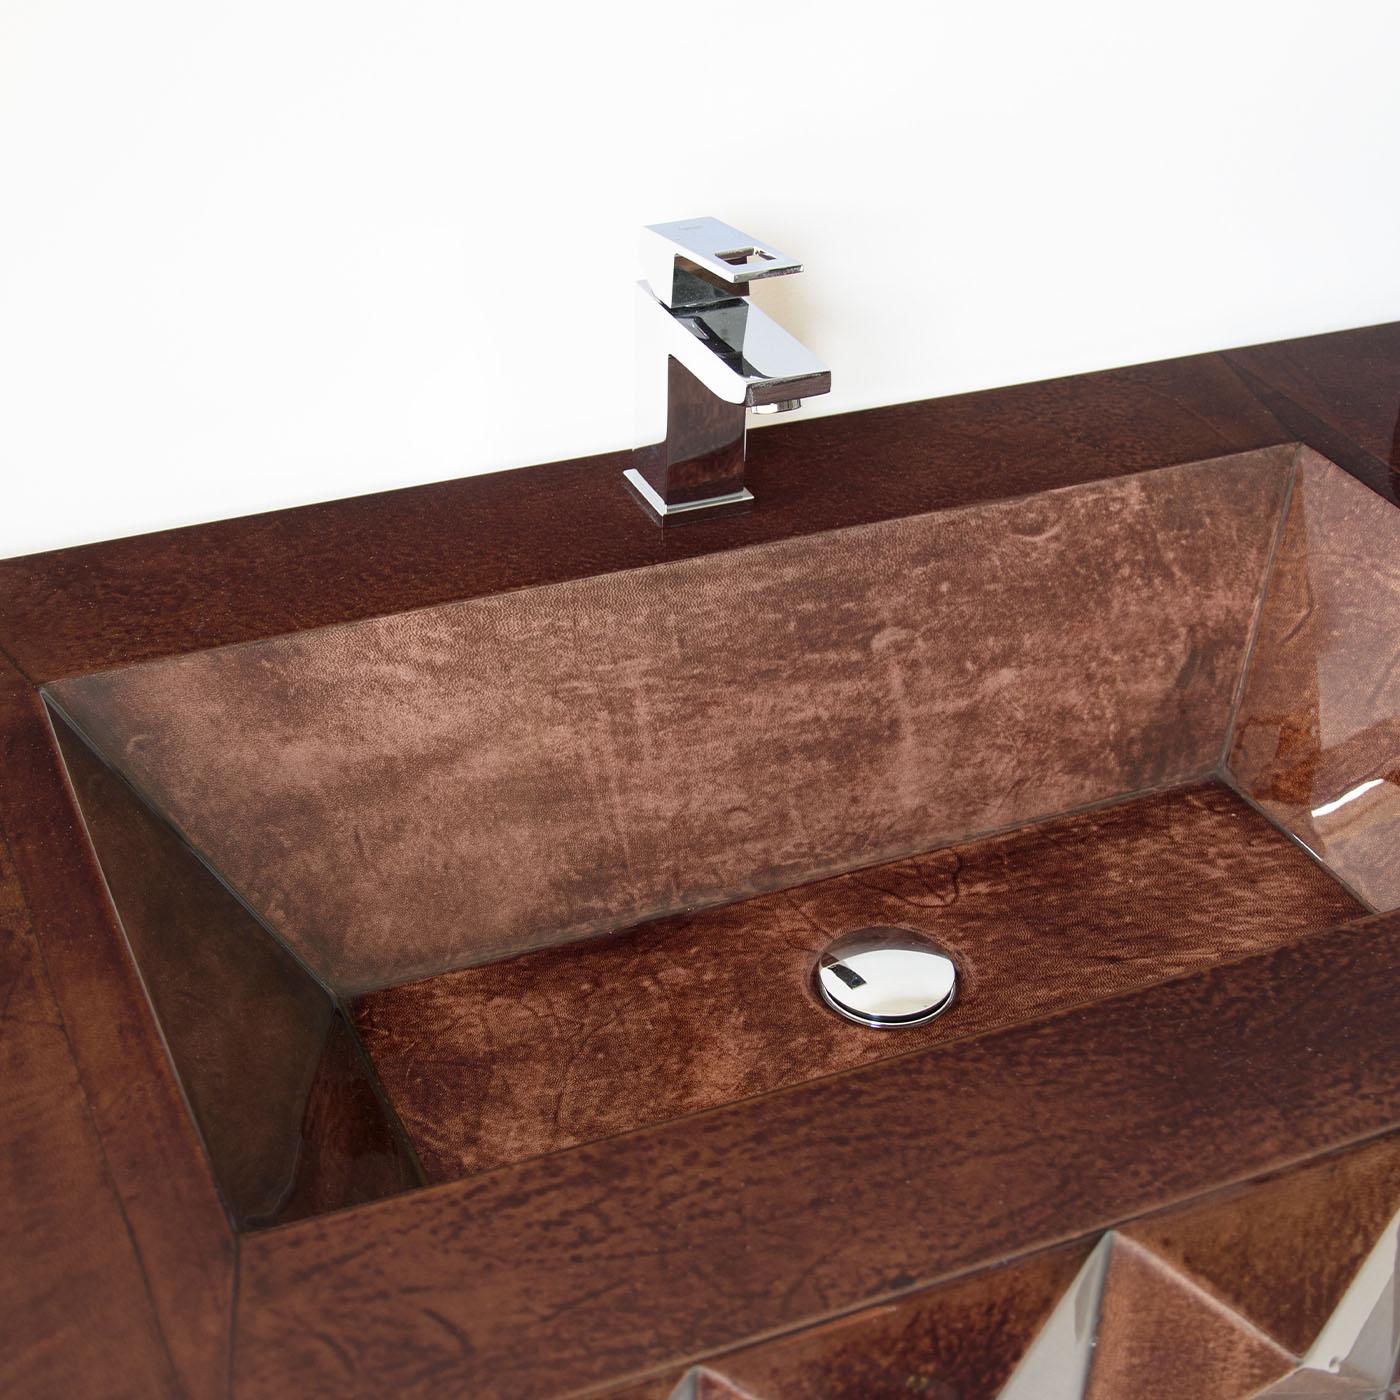 Bathroom Ensemble By Giannella Ventura In New Condition For Sale In Milan, IT